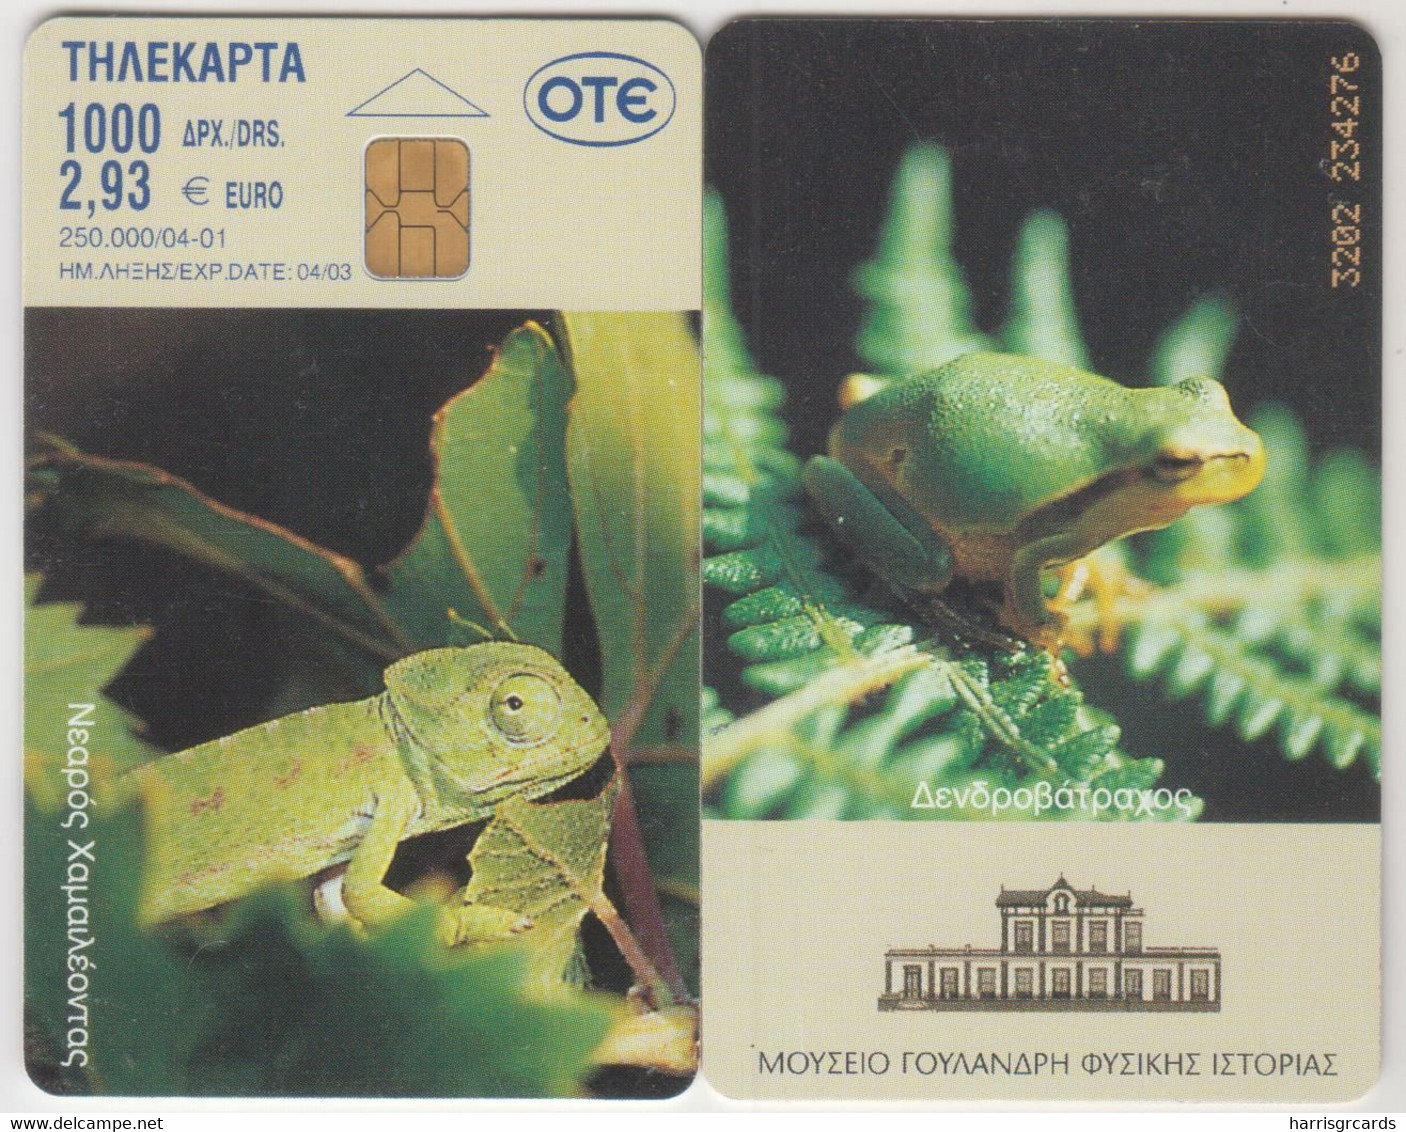 GREECE - History Of Nature, Young Chameleon,X1100, 2,93 € , Tirage 250.000, 04/01, Used - Grèce